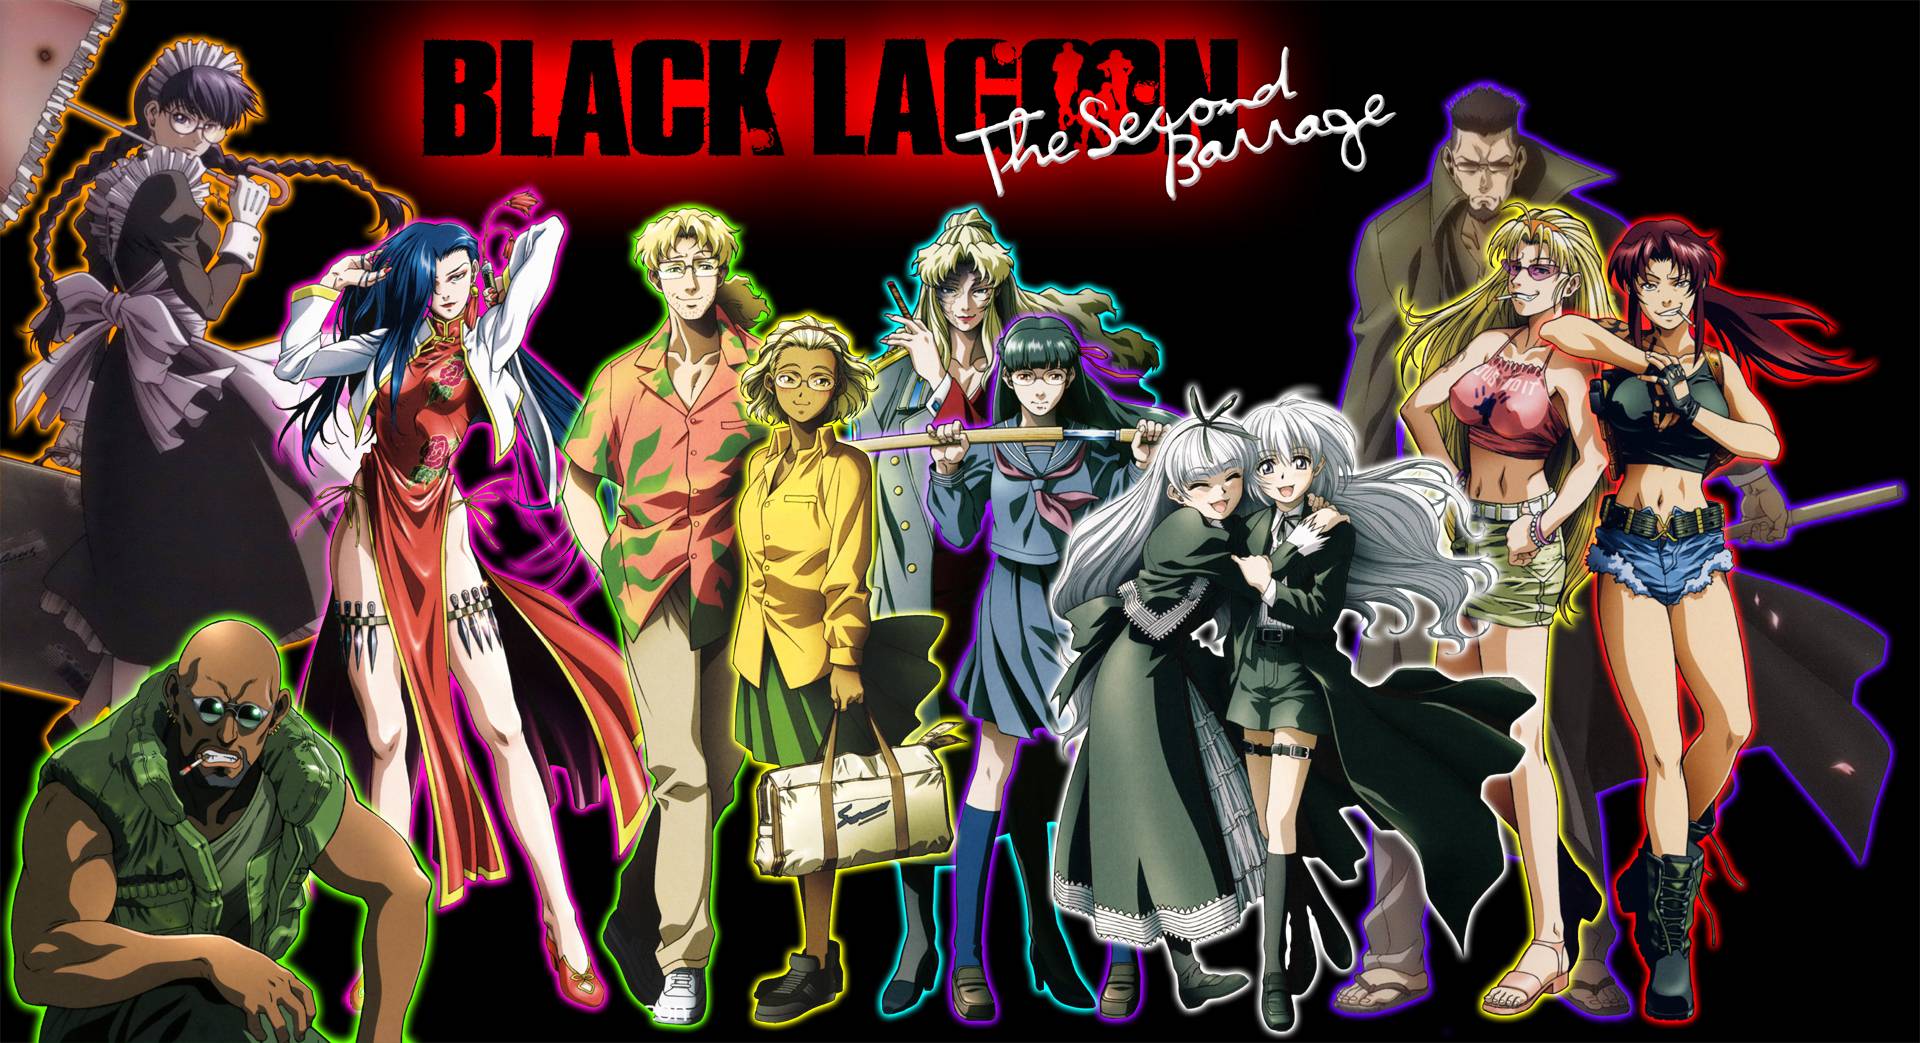 Free Download Black Lagoon Wallpapers 19x1043 For Your Desktop Mobile Tablet Explore 76 Black Lagoon Wallpaper Black Anime Wallpaper Revy Black Lagoon Wallpaper Black Lagoon Wallpaper For Pc